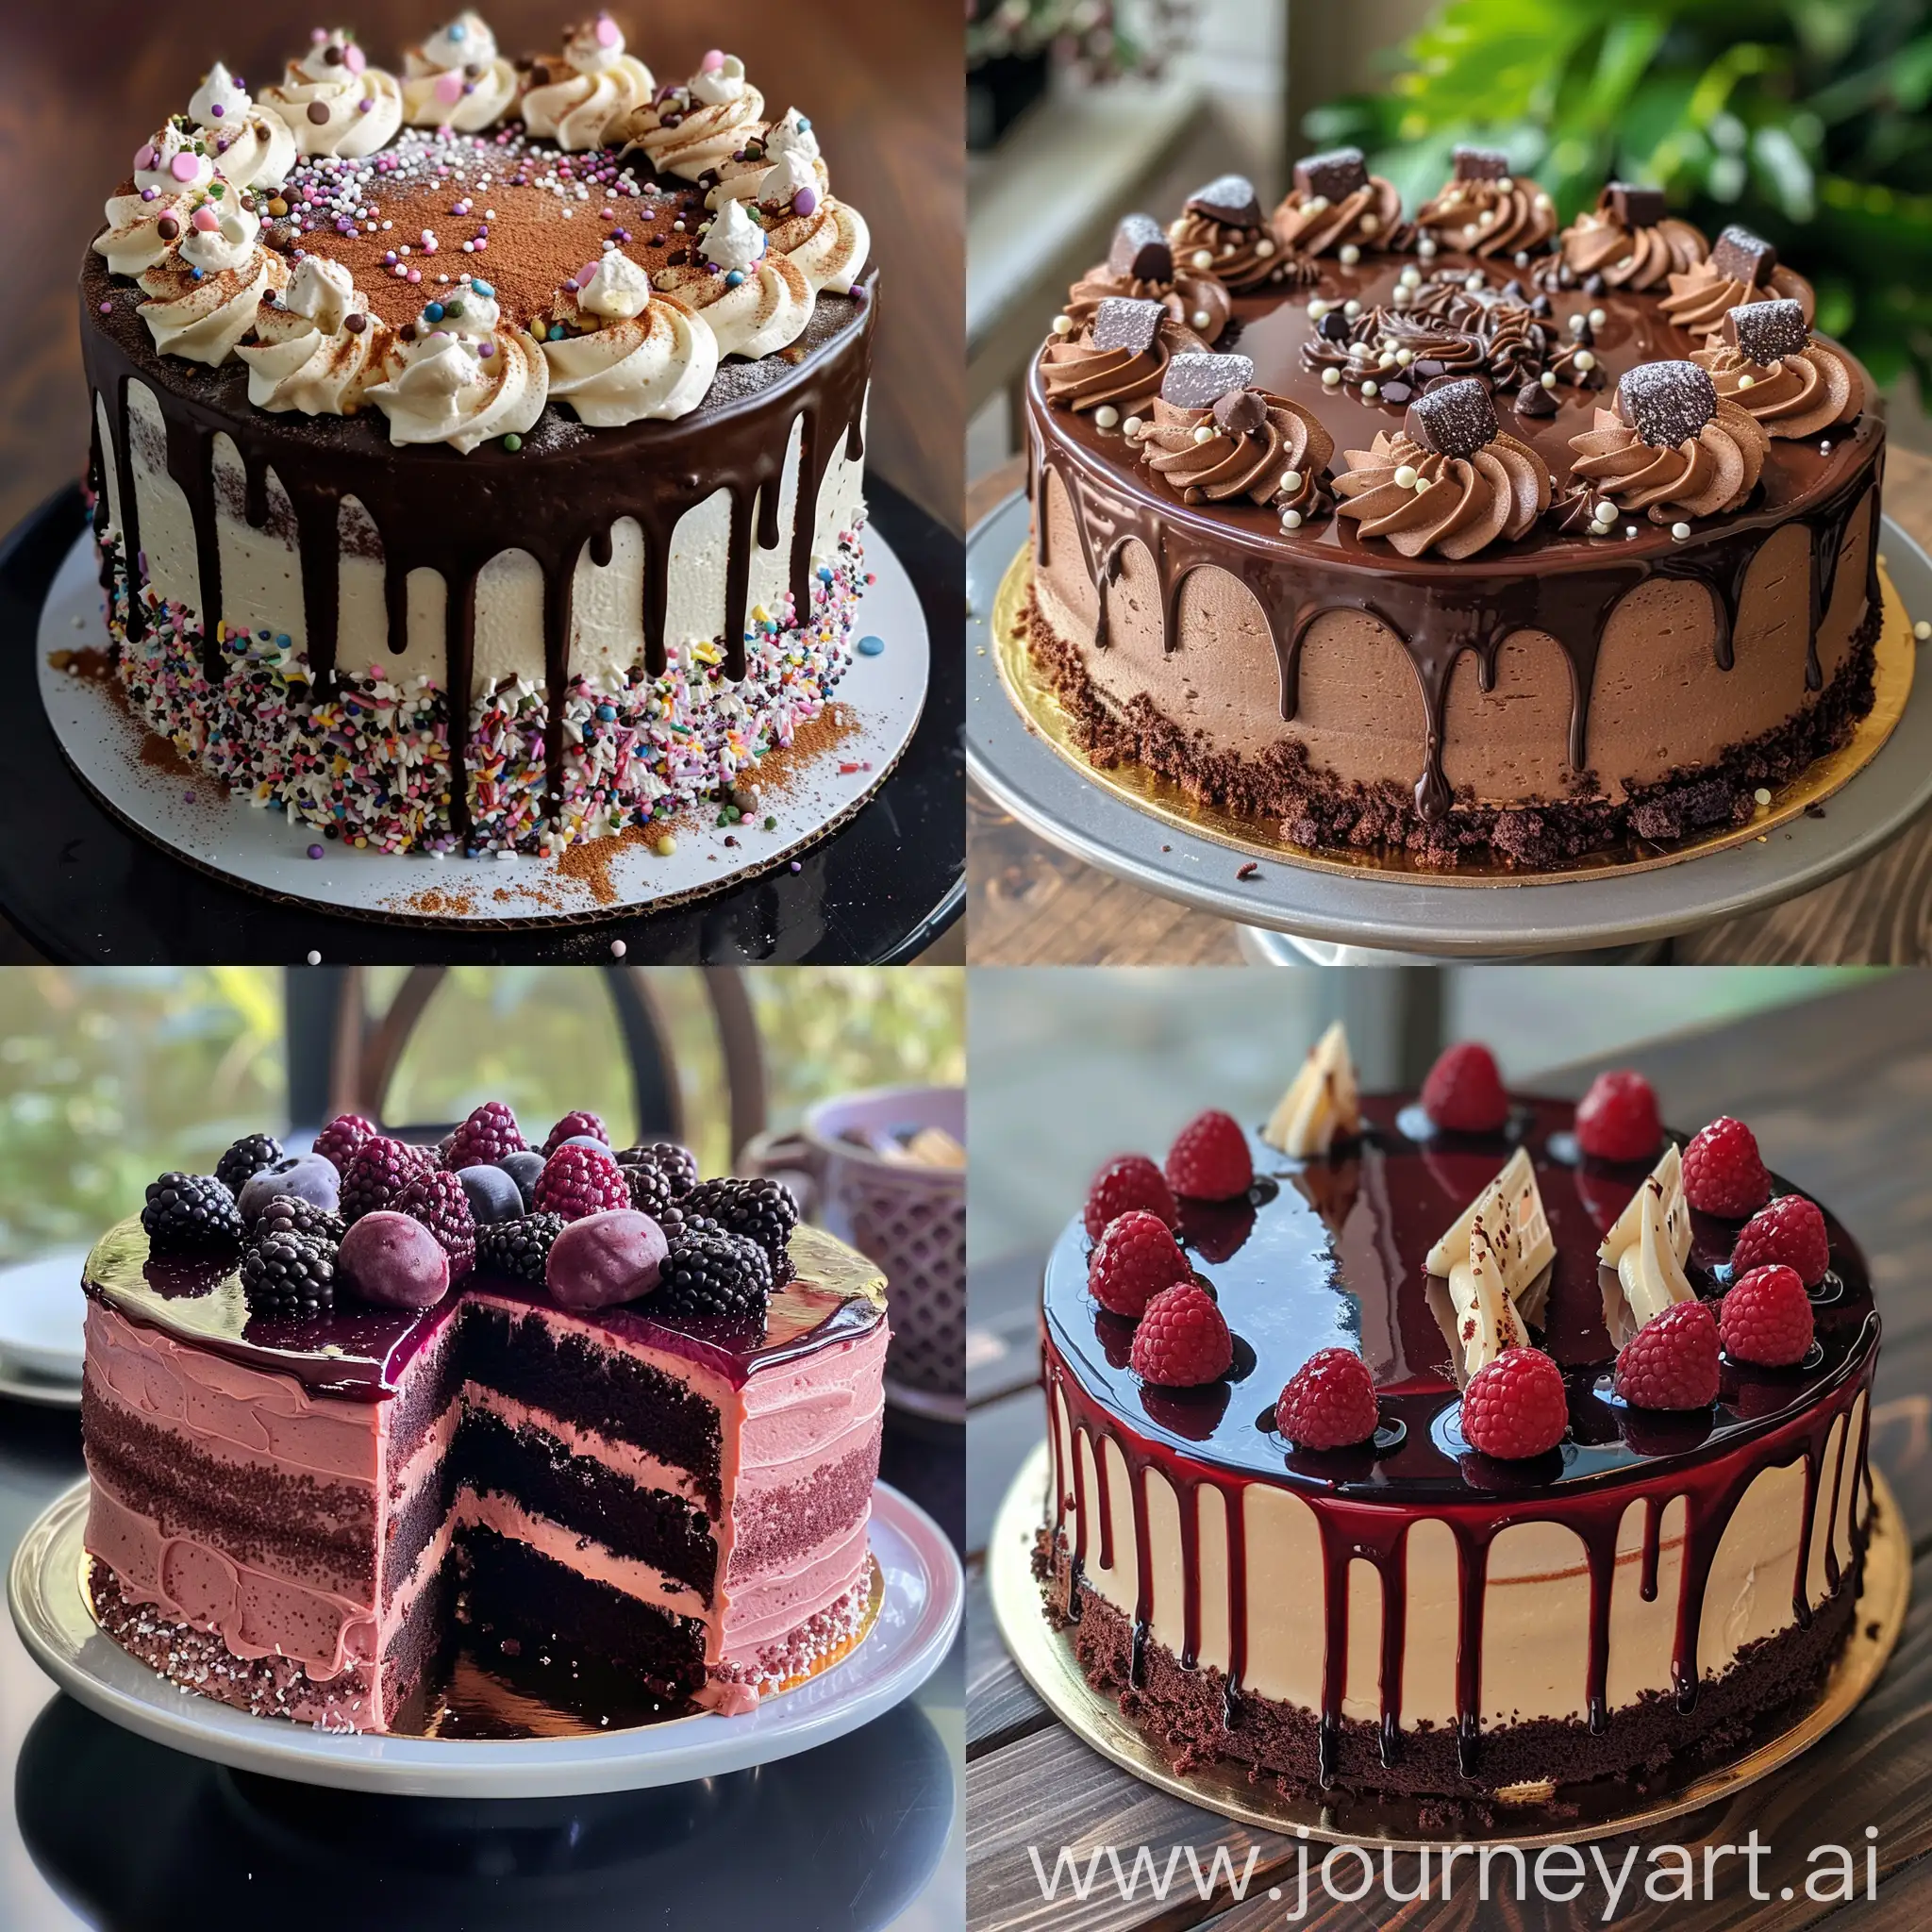 Delicious-Worlds-Best-Cake-Creation-Tempting-Culinary-Artistry